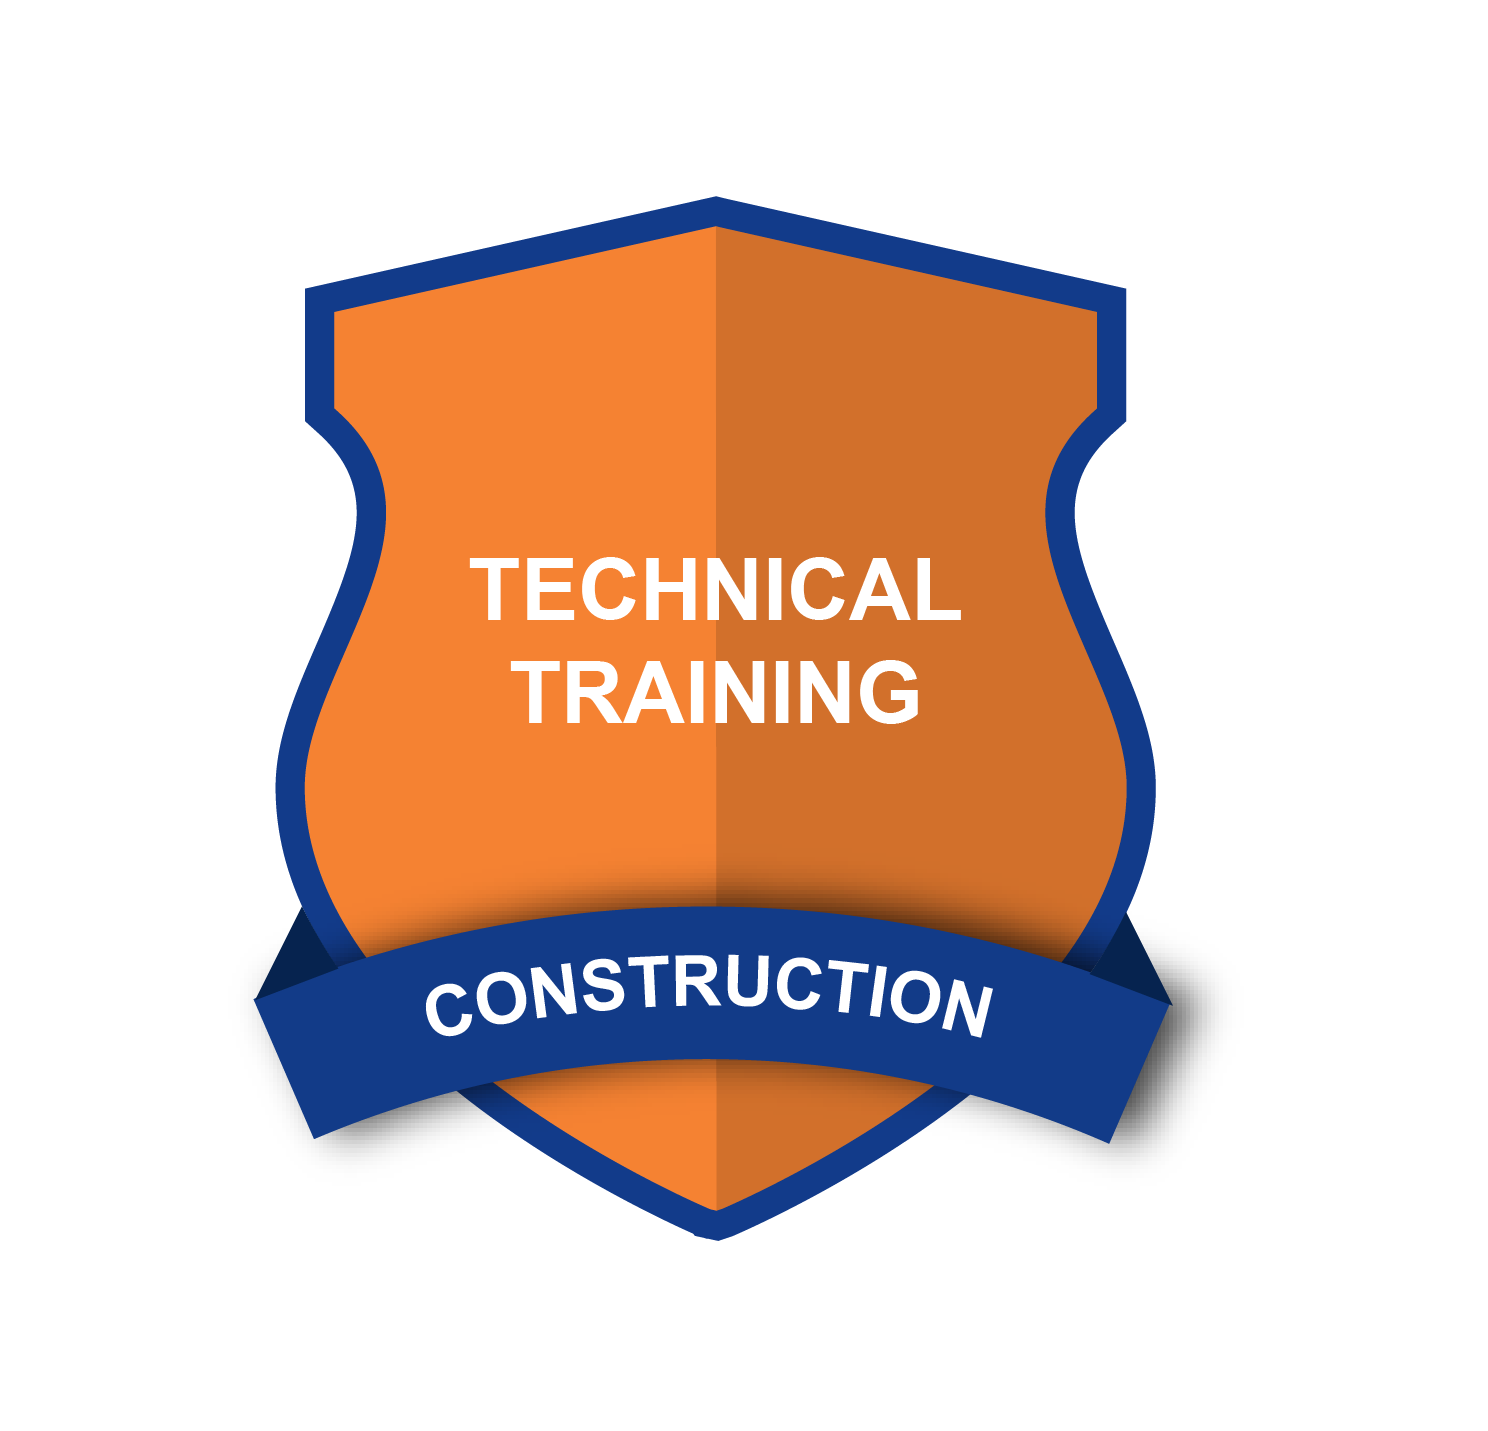 Assessment for becoming Alimak Trainer at Level 4 for Construction 